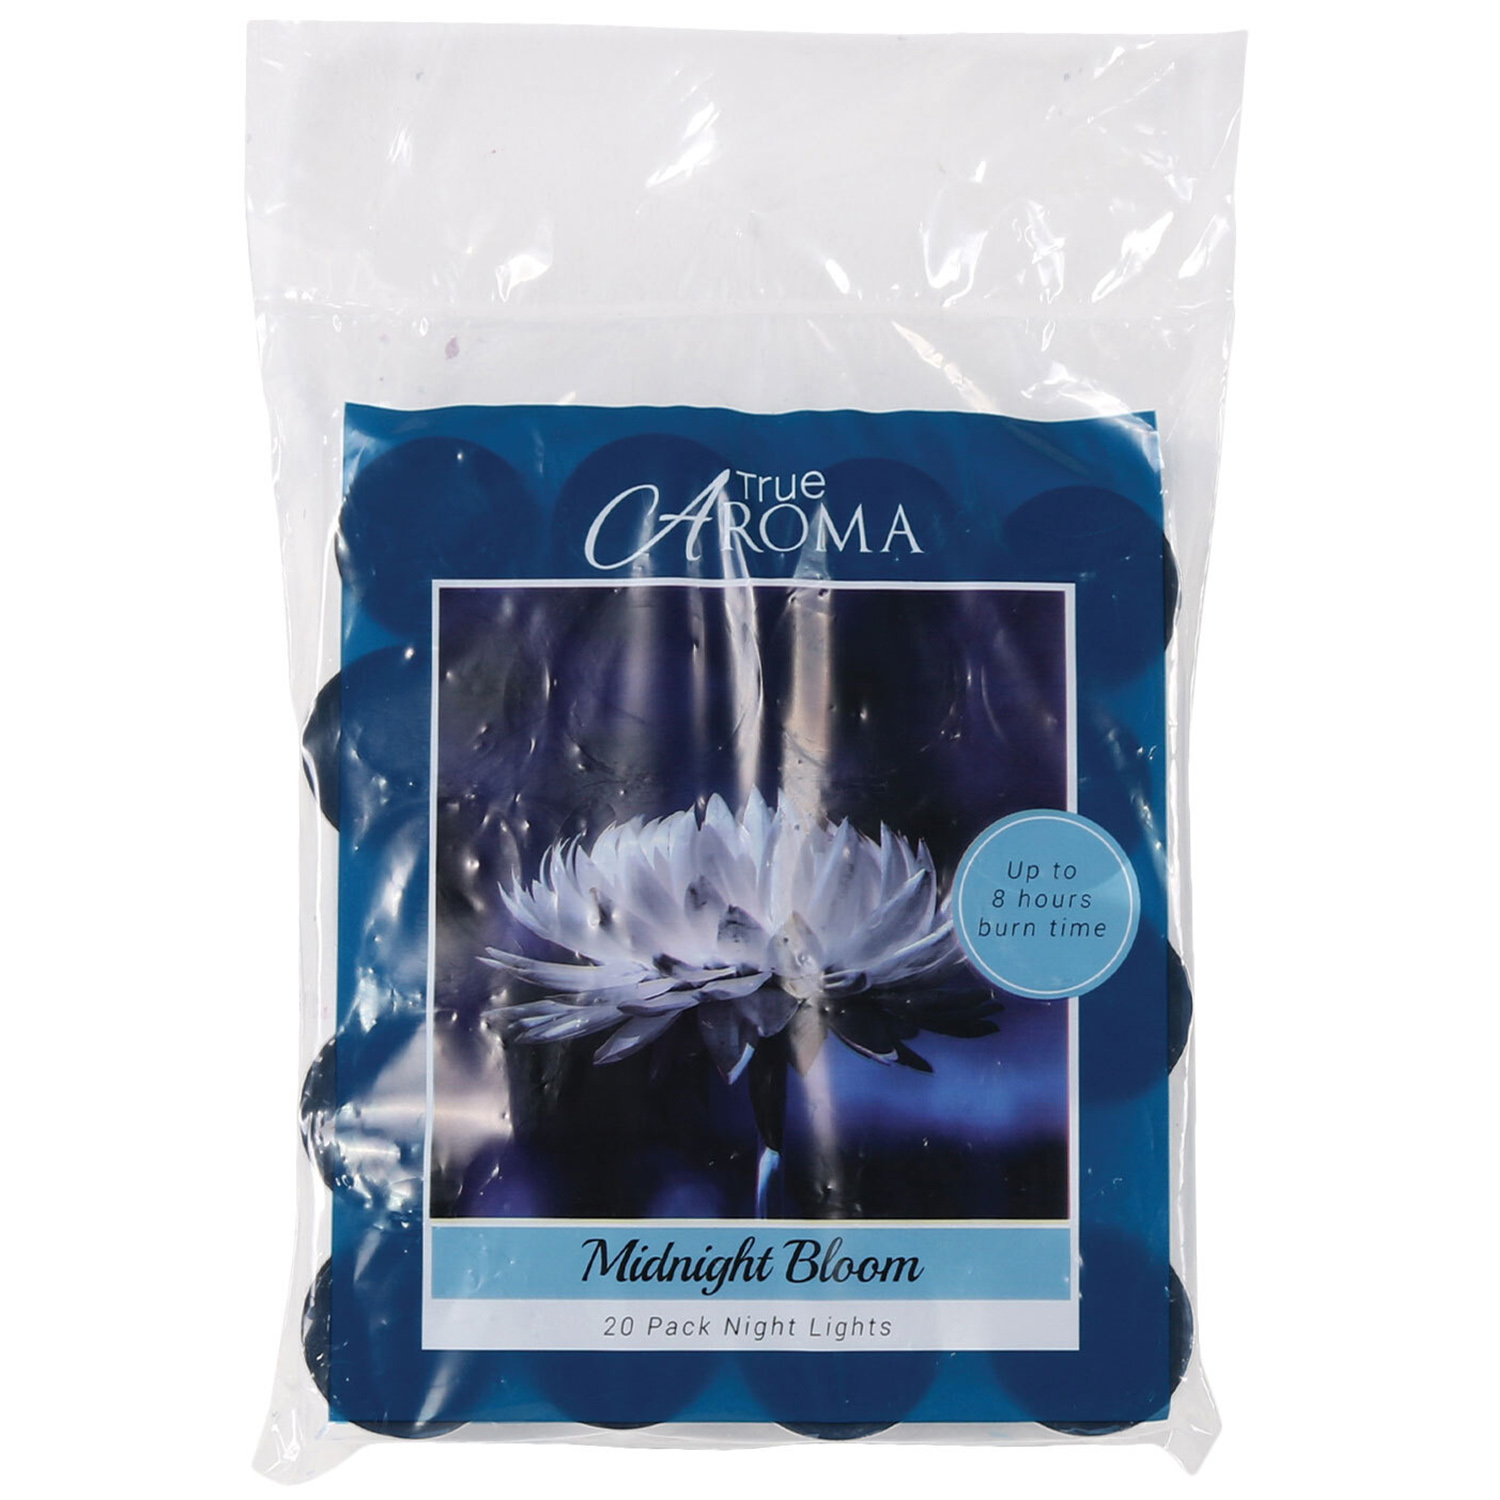 True Aroma Midnight Bloom Scented Tealight Candles 20 Pack Image